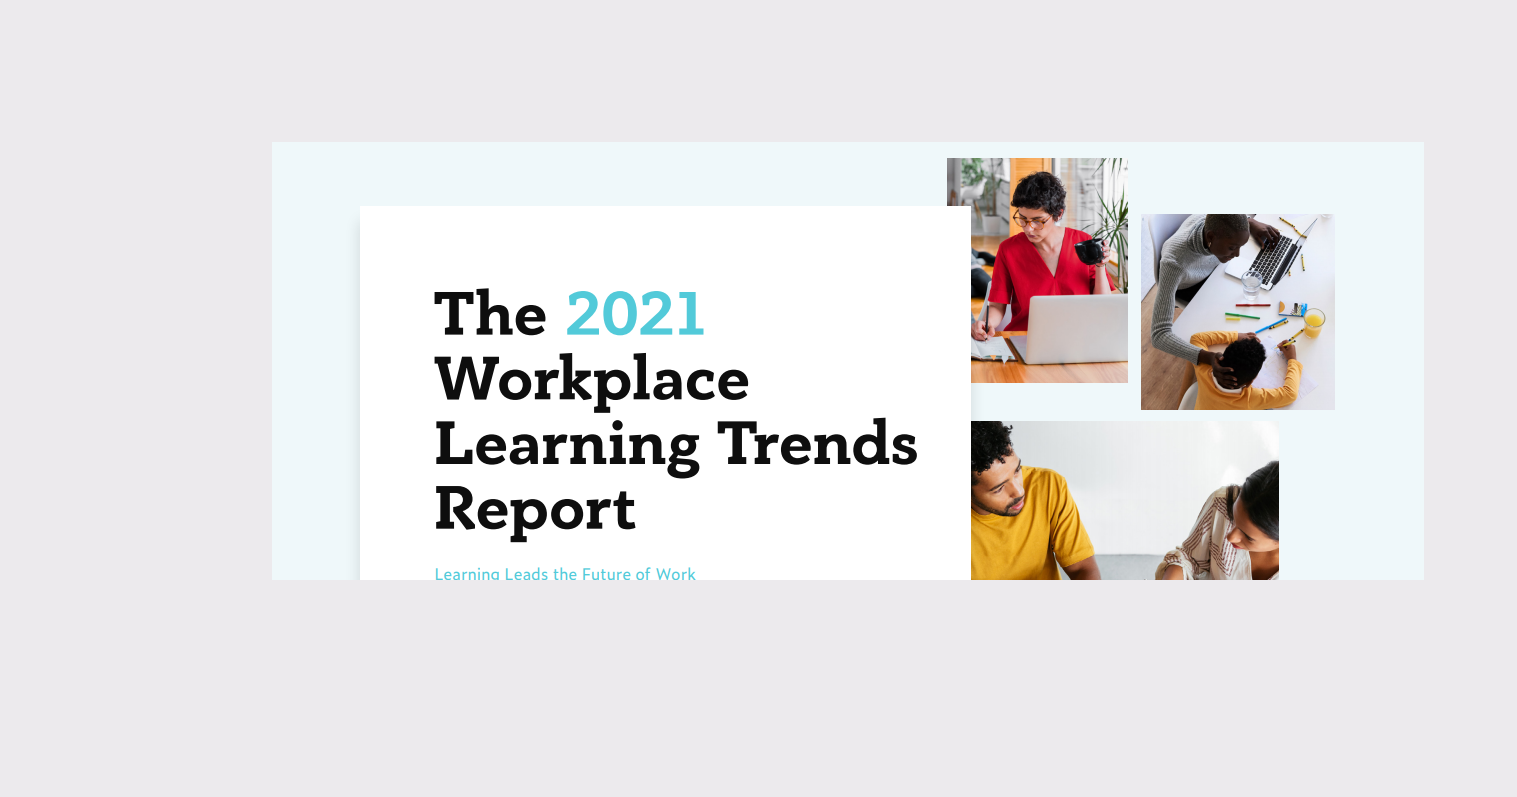 The 2021 Workplace Learning Trends